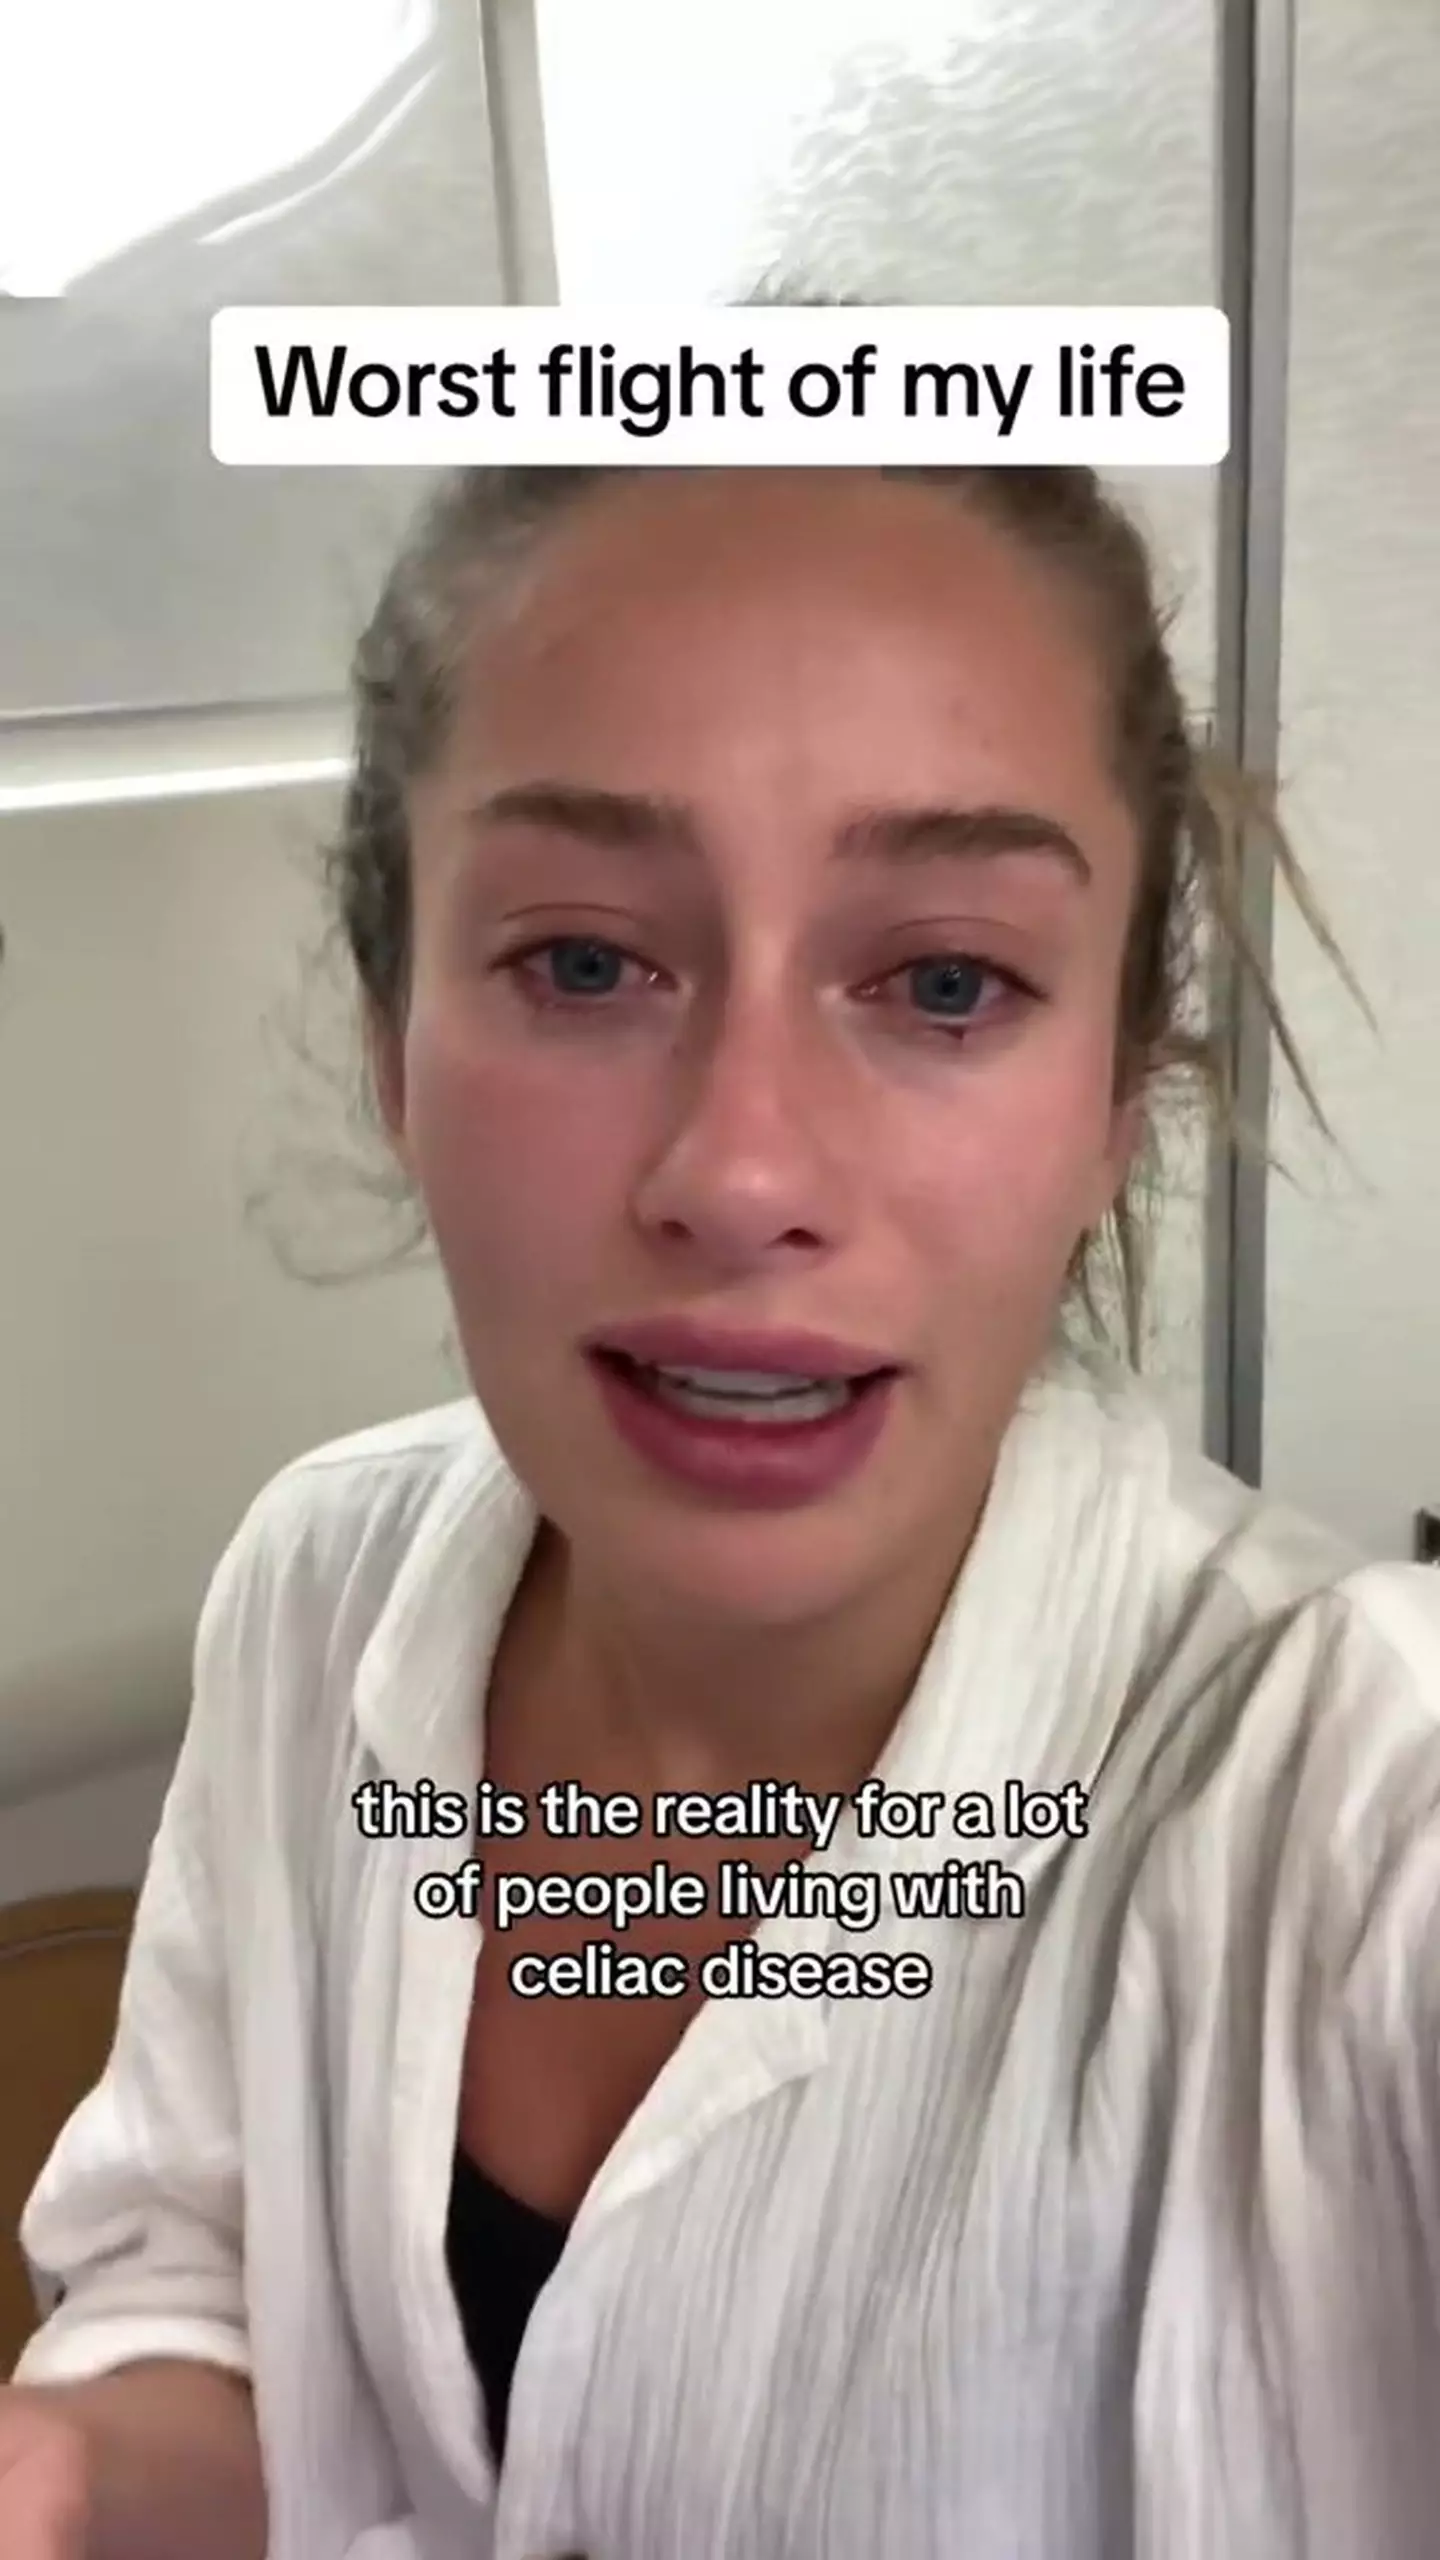 She posted a video about the ordeal on TikTok.